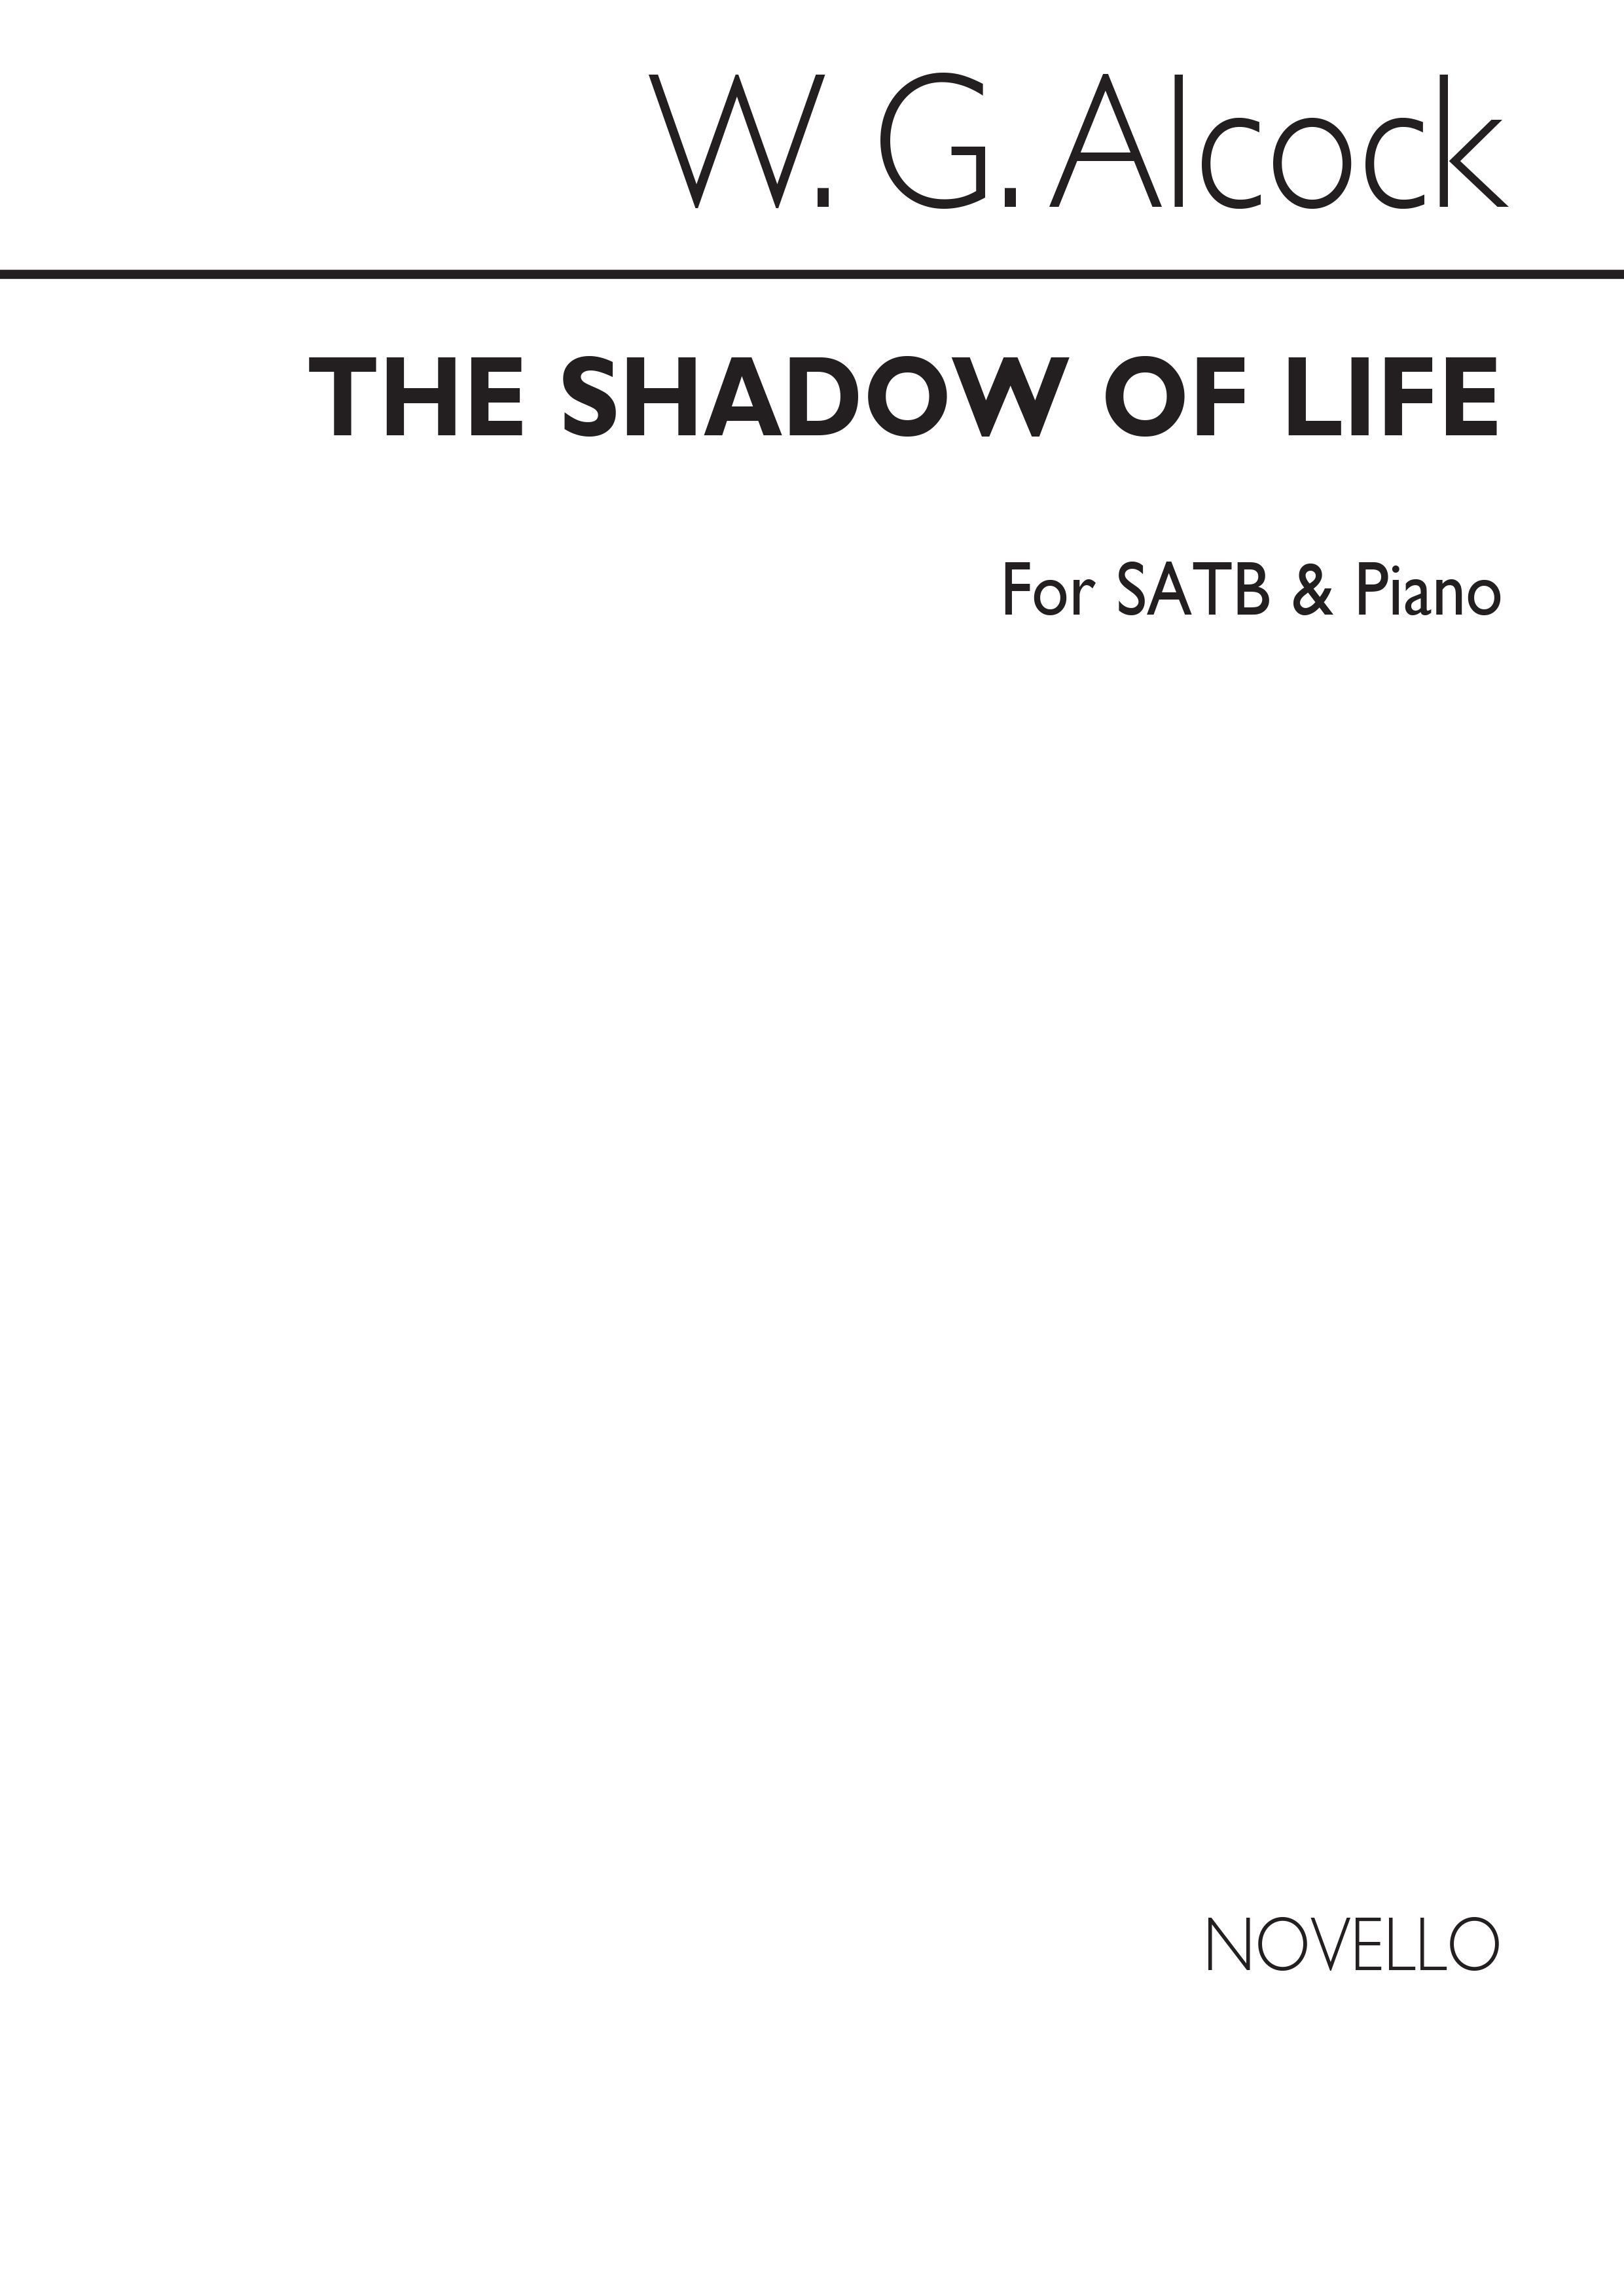 Walter G. Alcock: The Shadow Of Life: SATB: Vocal Score